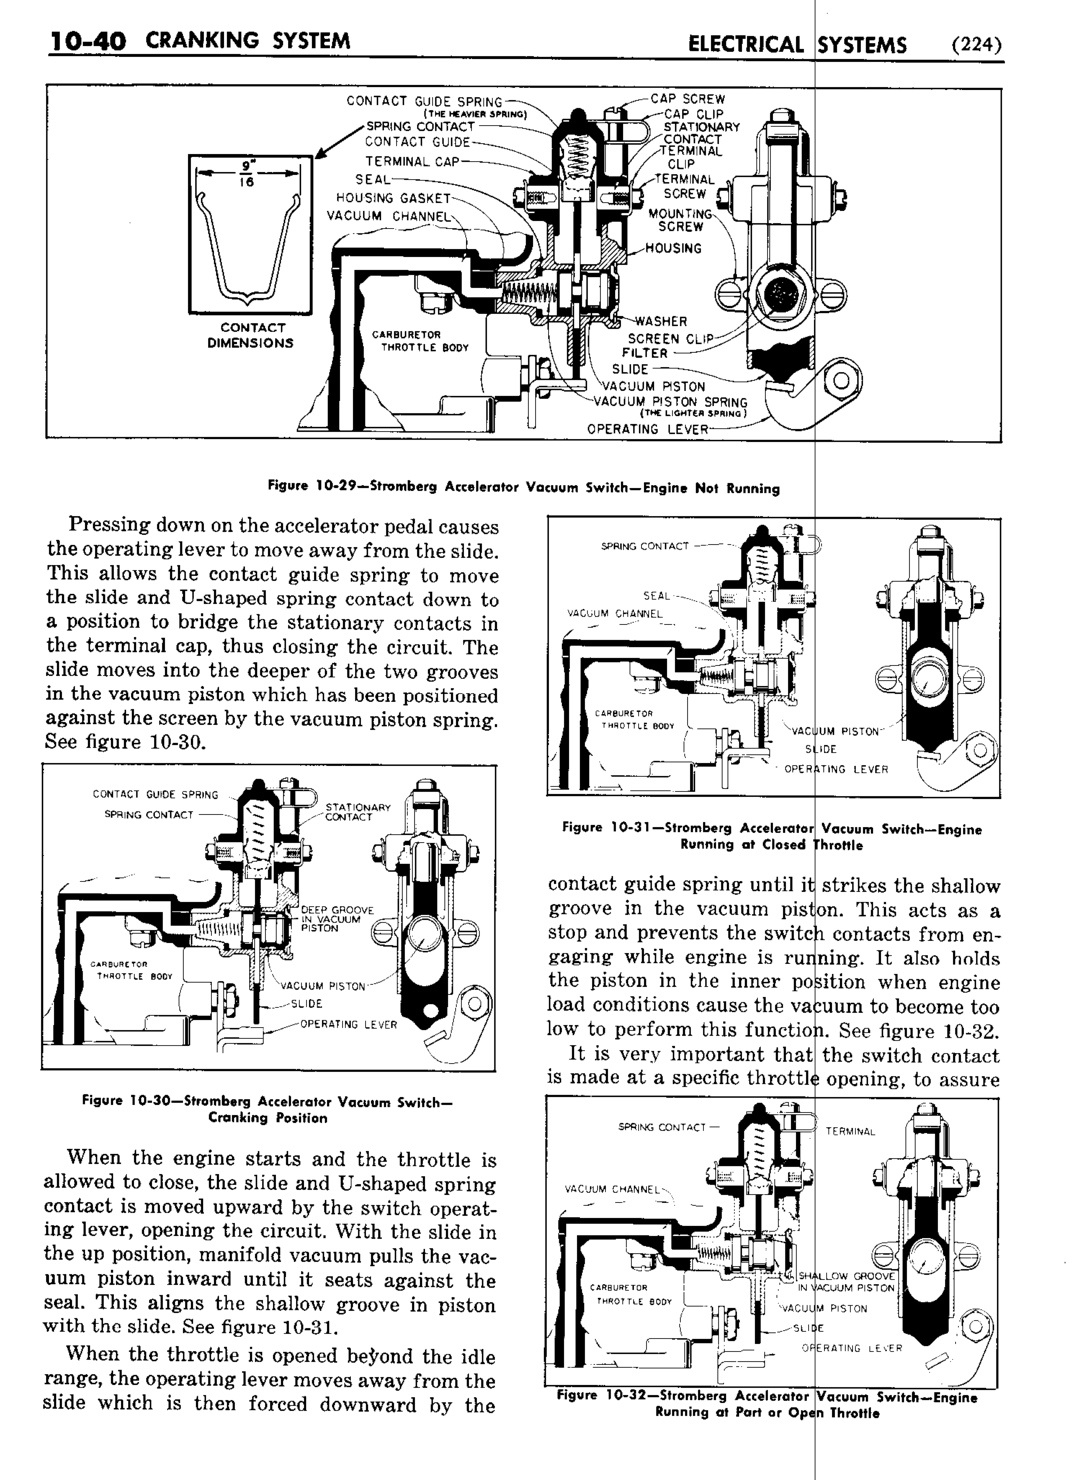 n_11 1953 Buick Shop Manual - Electrical Systems-040-040.jpg